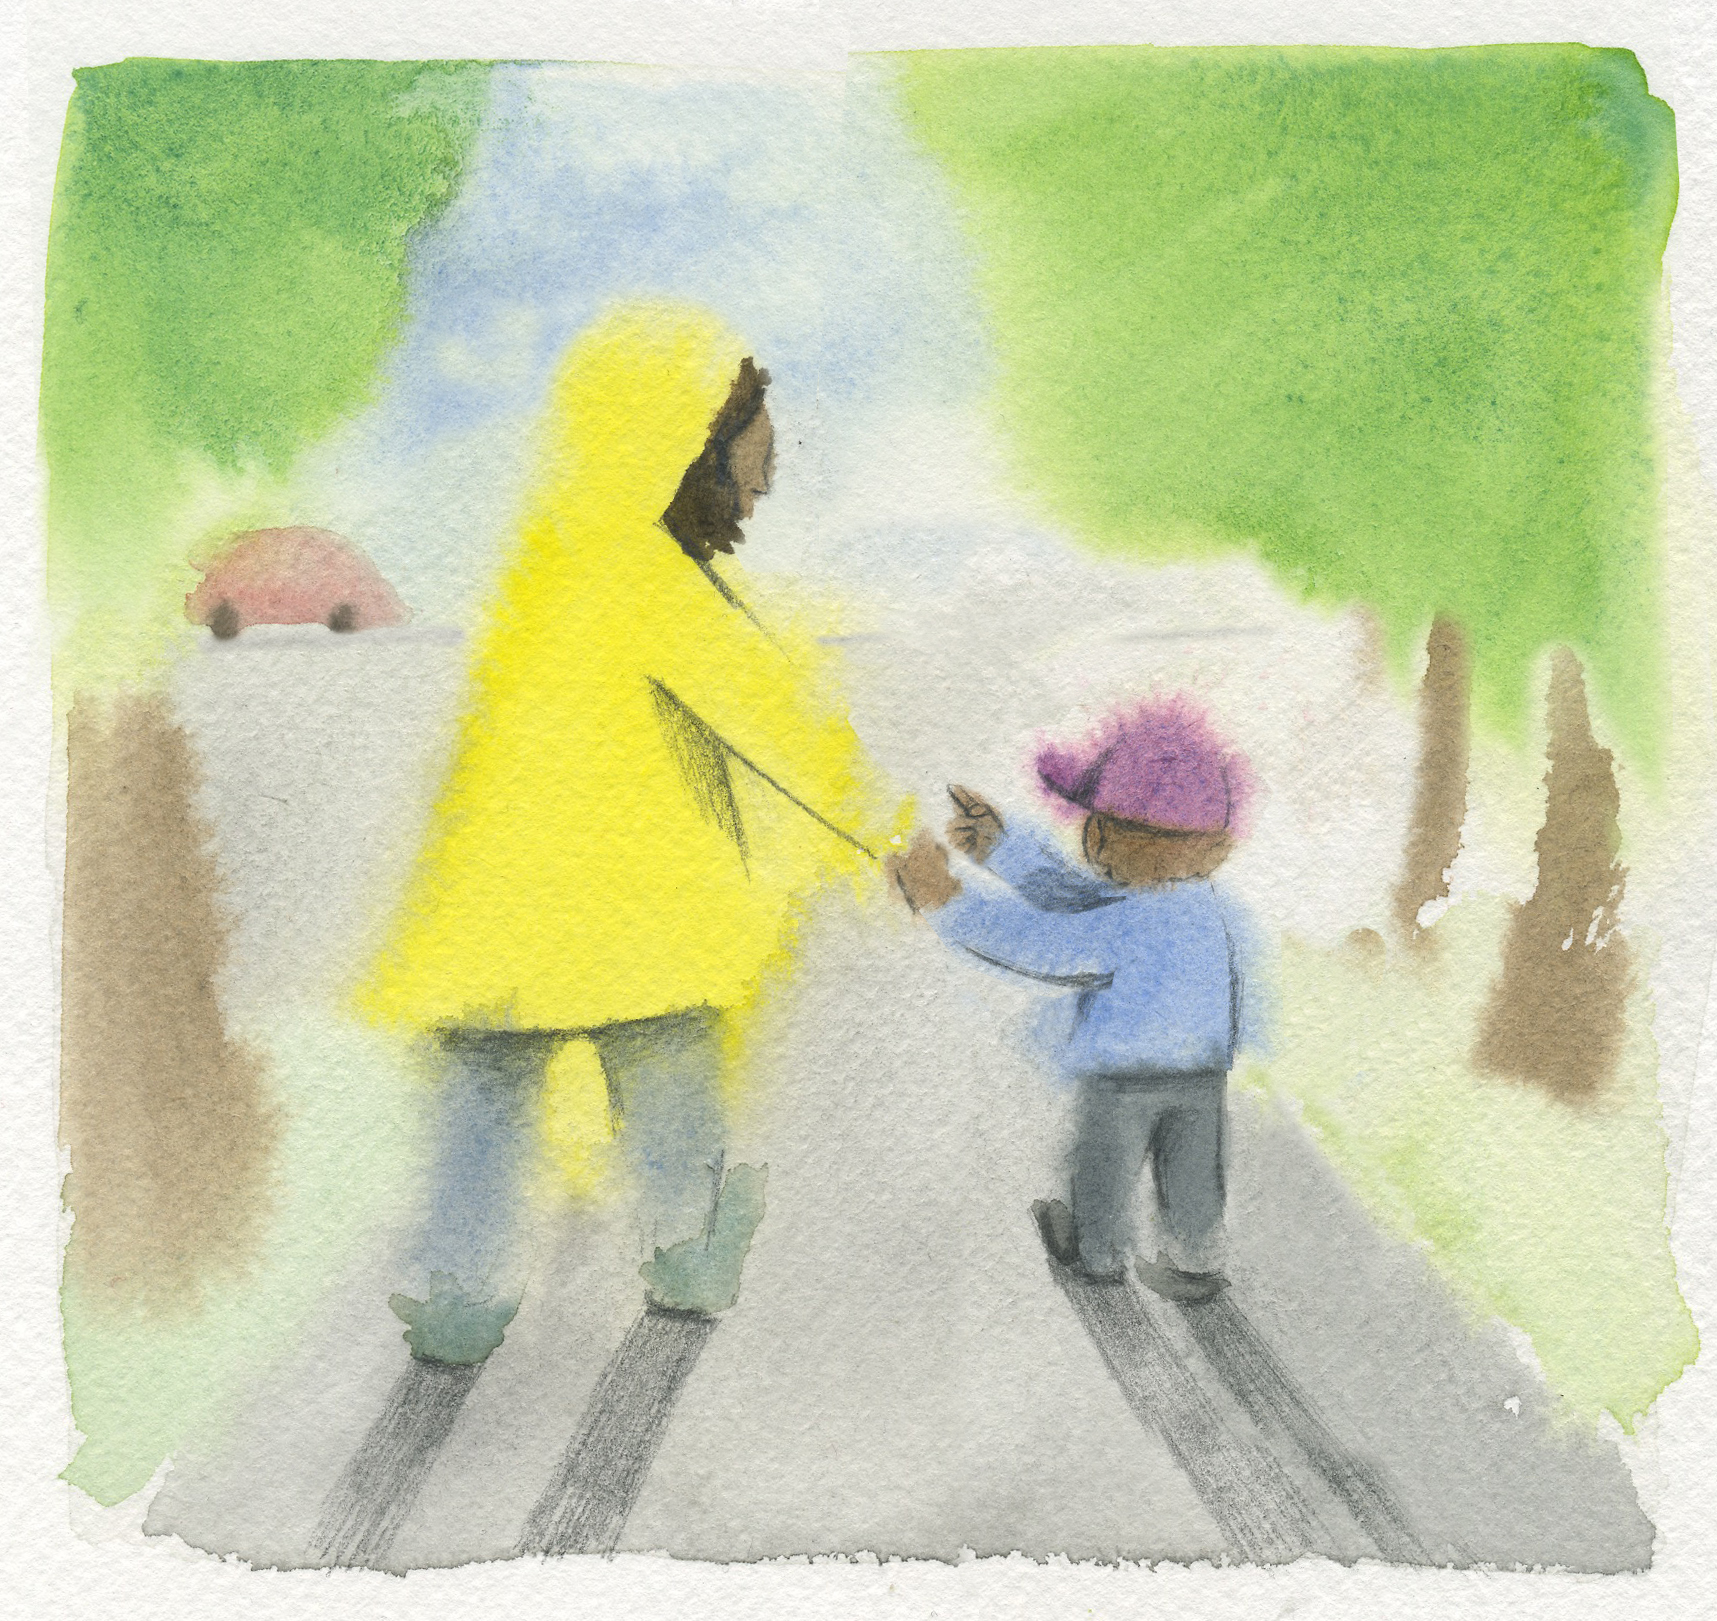 watercolor painting of an adult and child, holding hands, walking down a tree-lined sidewalk. a red car is visible in the distance.